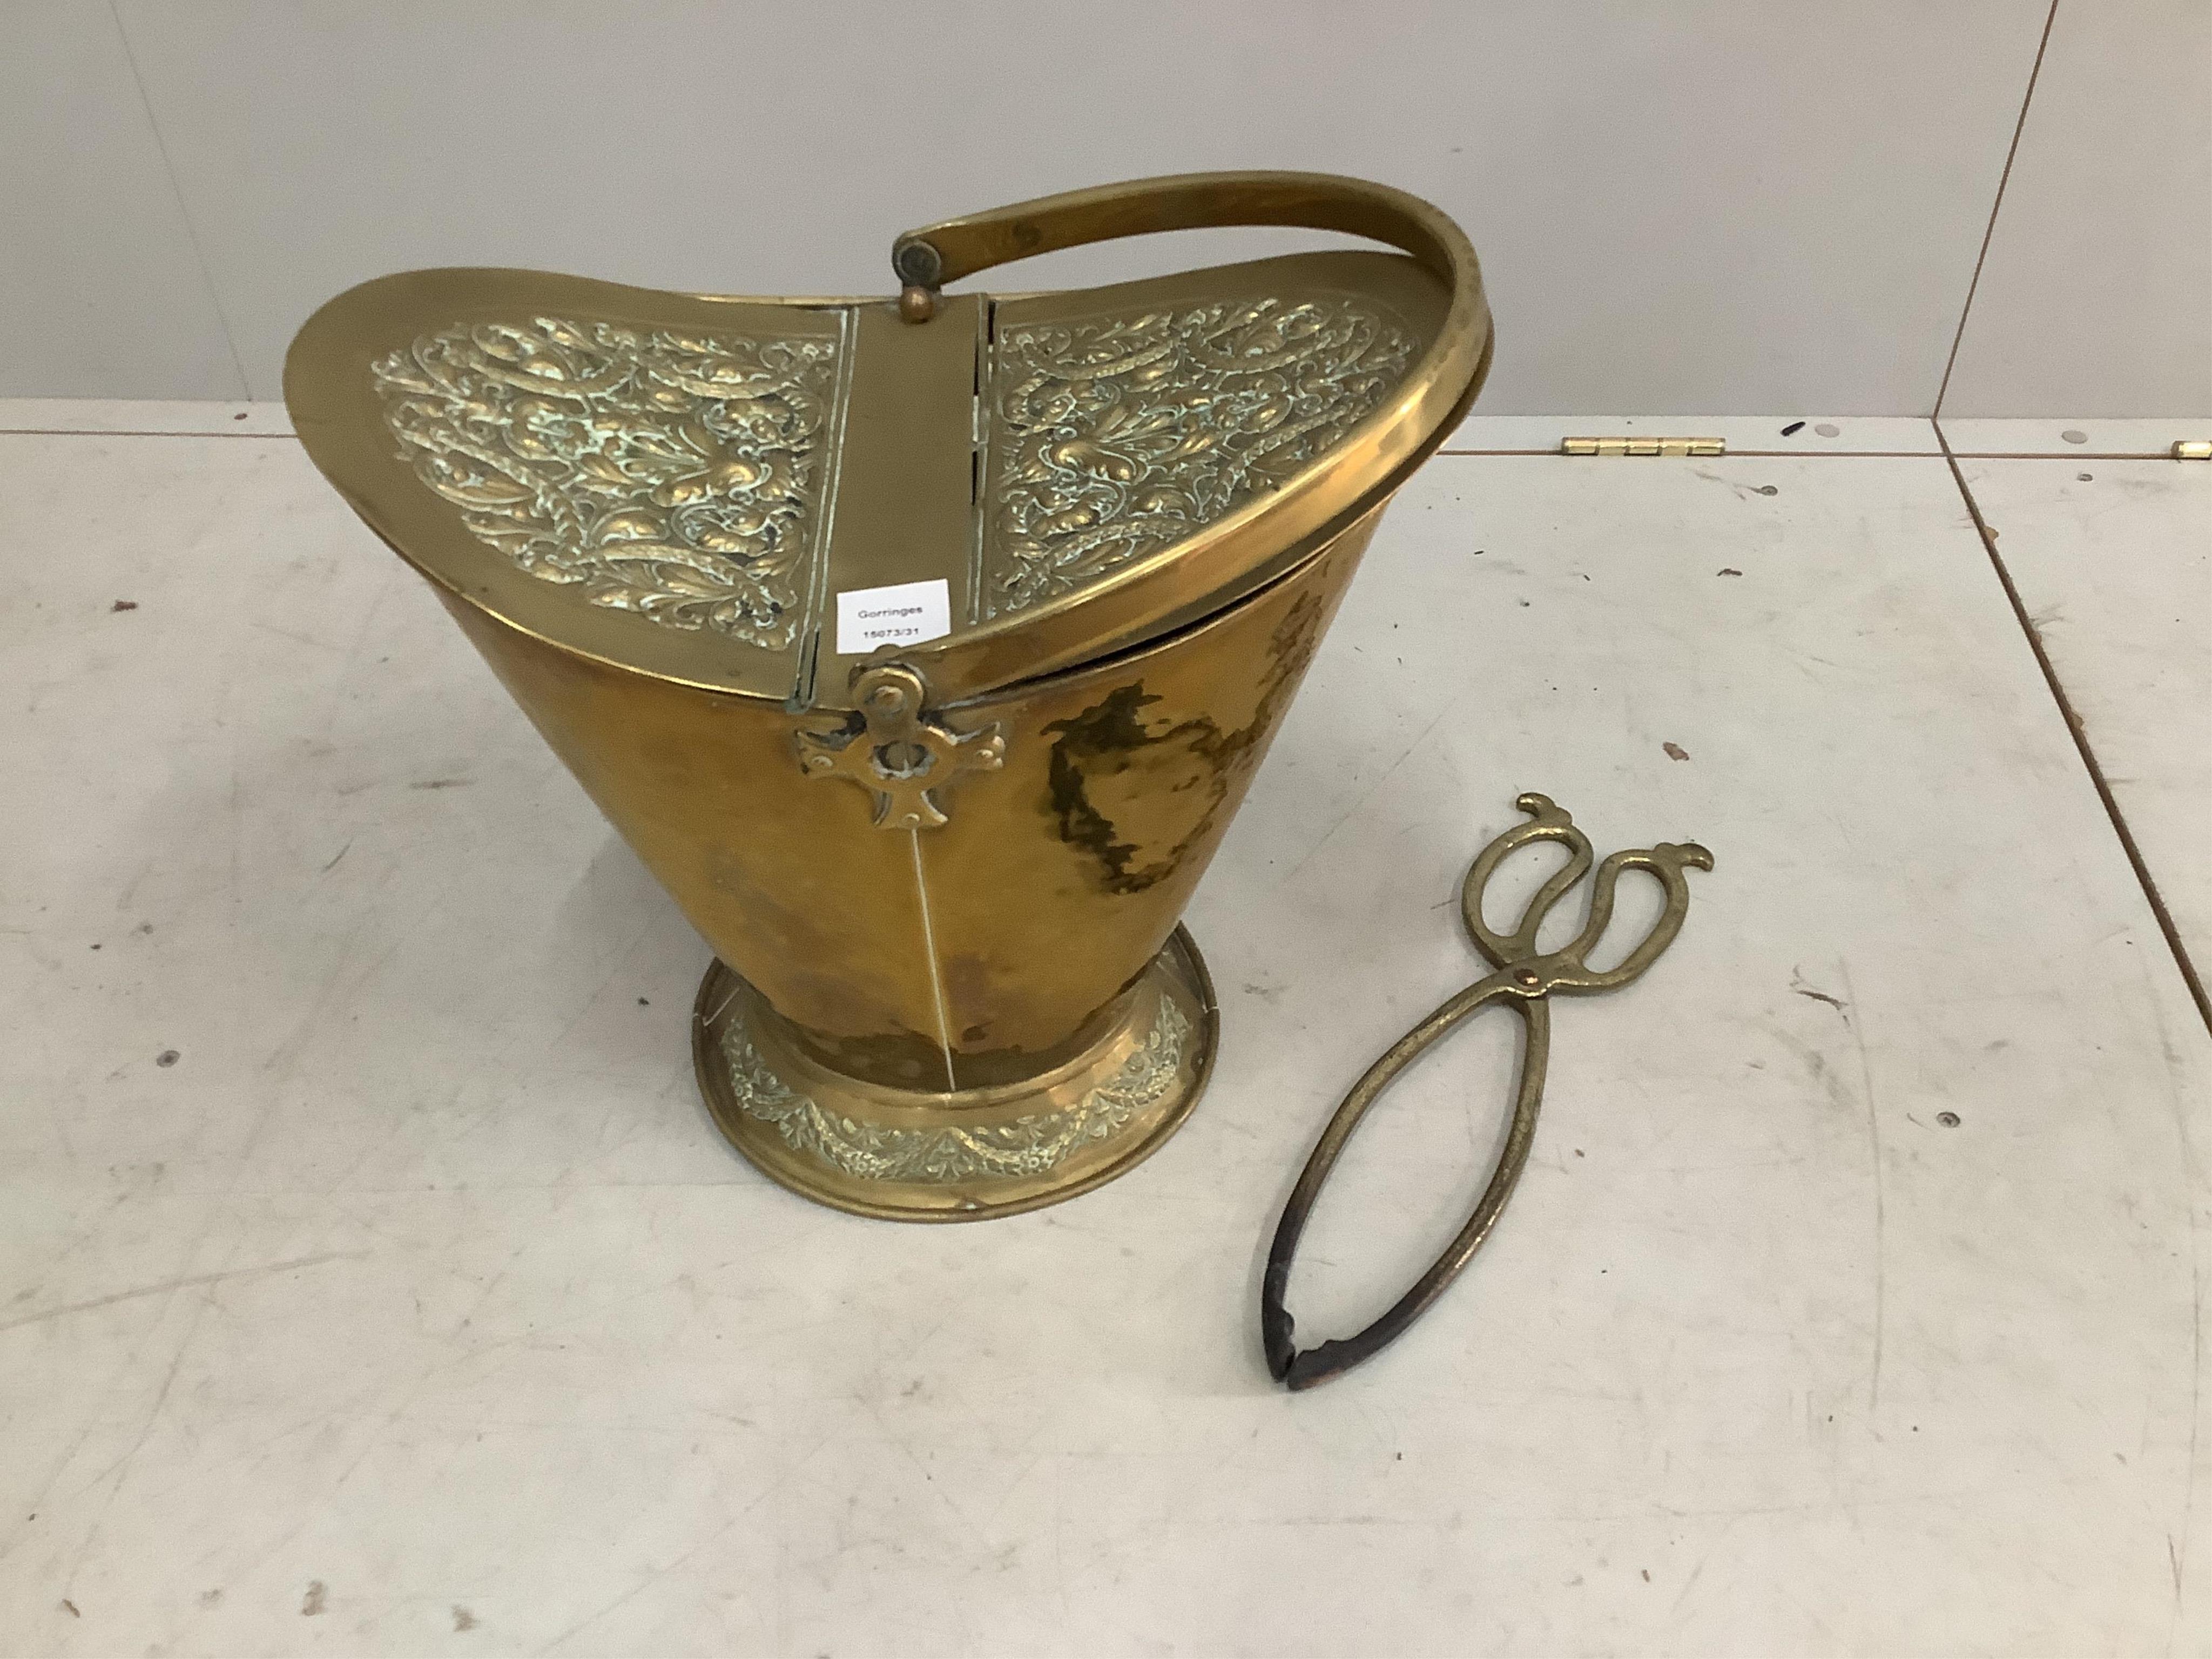 A late Victorian embossed brass coal scuttle, height 43cm, and a pair of tongs. Condition - fair